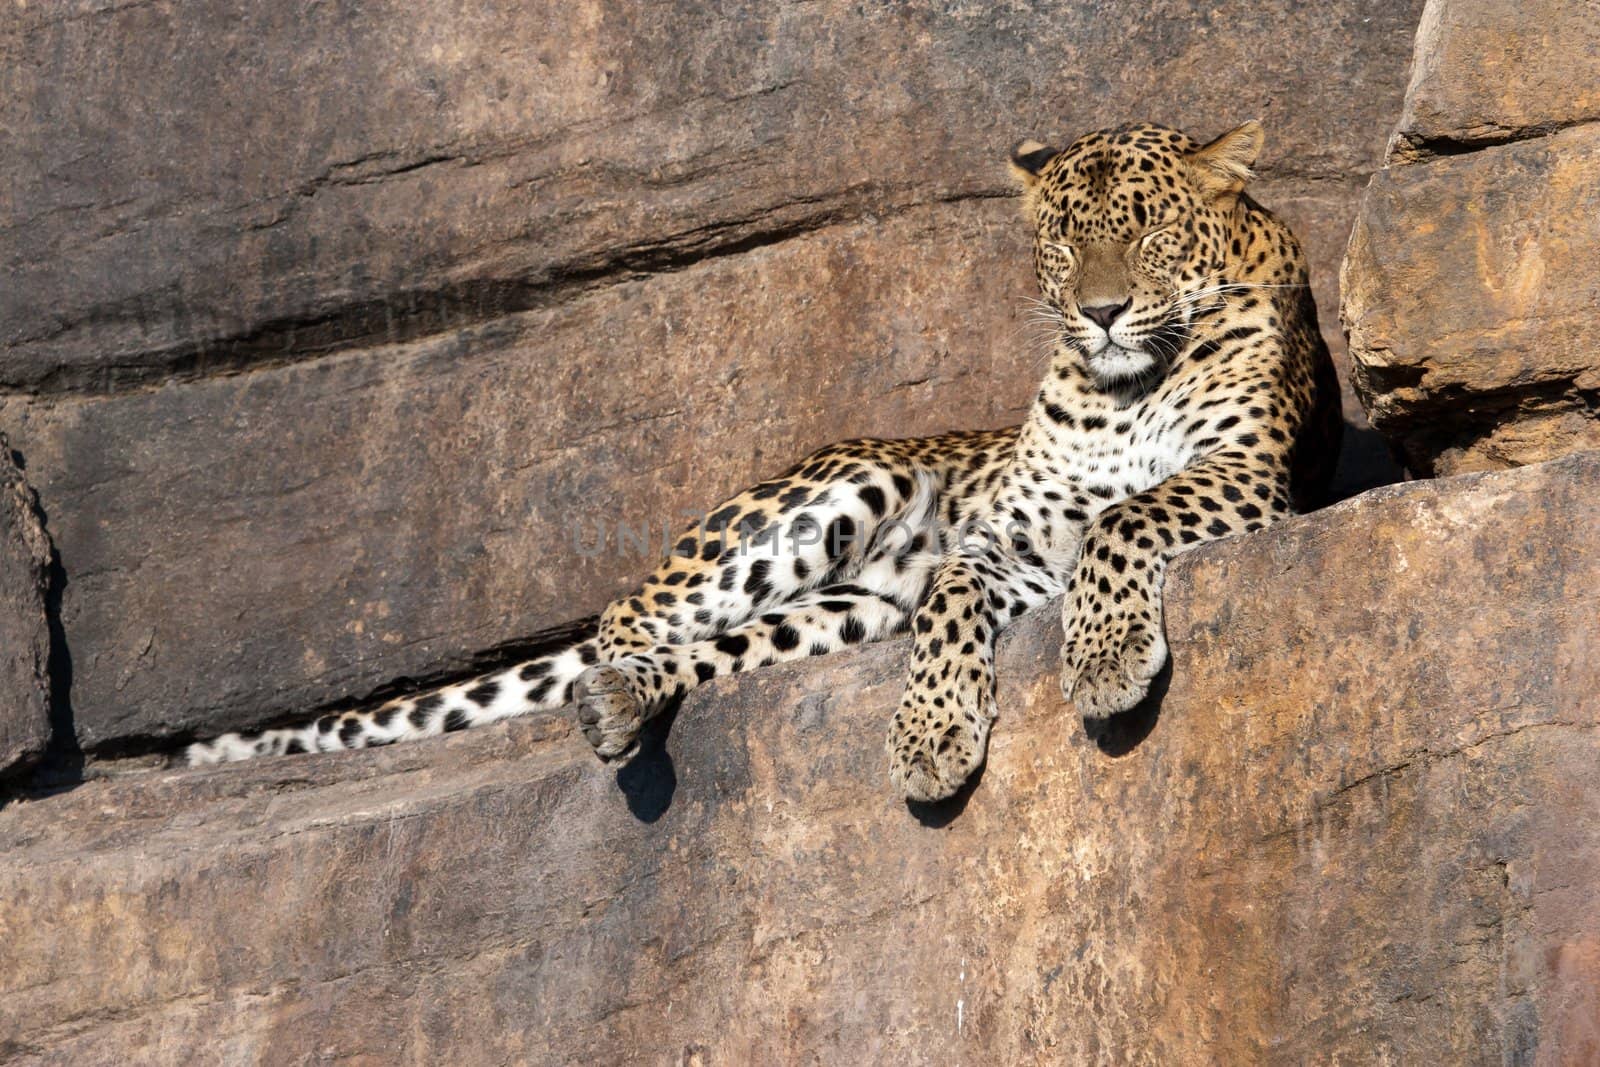 Adult leopard resting on a rock in the zoo Bioparc in Valencia (Spain)